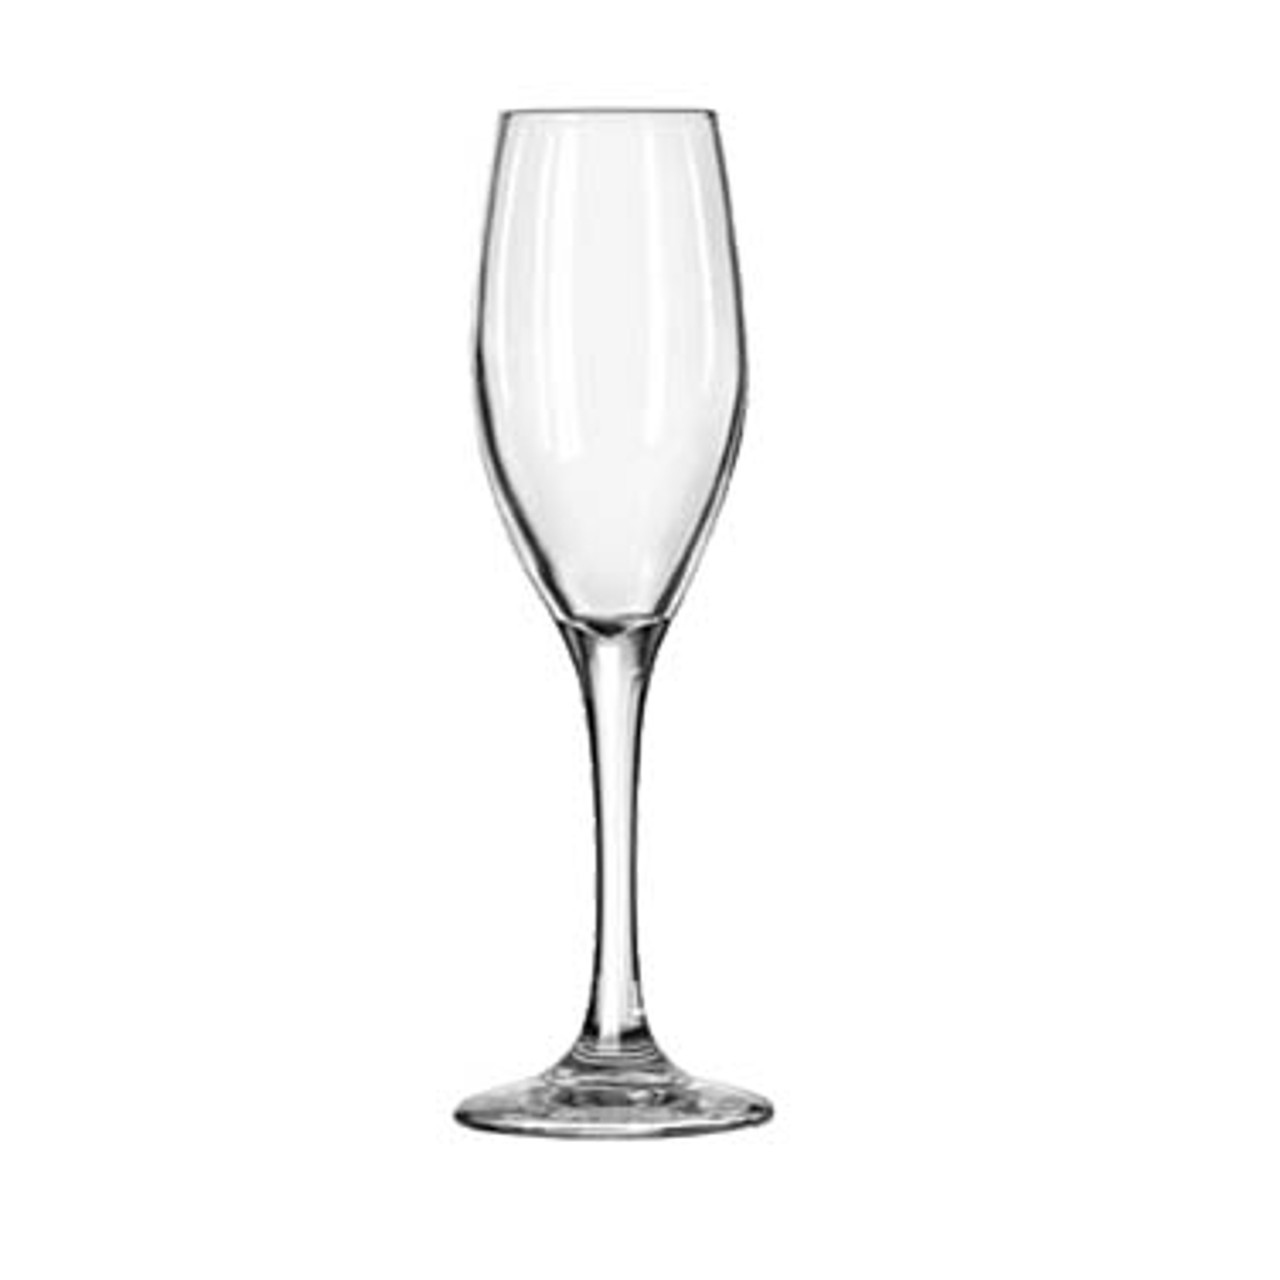 https://cdn11.bigcommerce.com/s-g3i86bef61/images/stencil/1280x1280/products/1390/2903/Libbey-3096-Flute-Glass__55373.1665092602.jpg?c=1